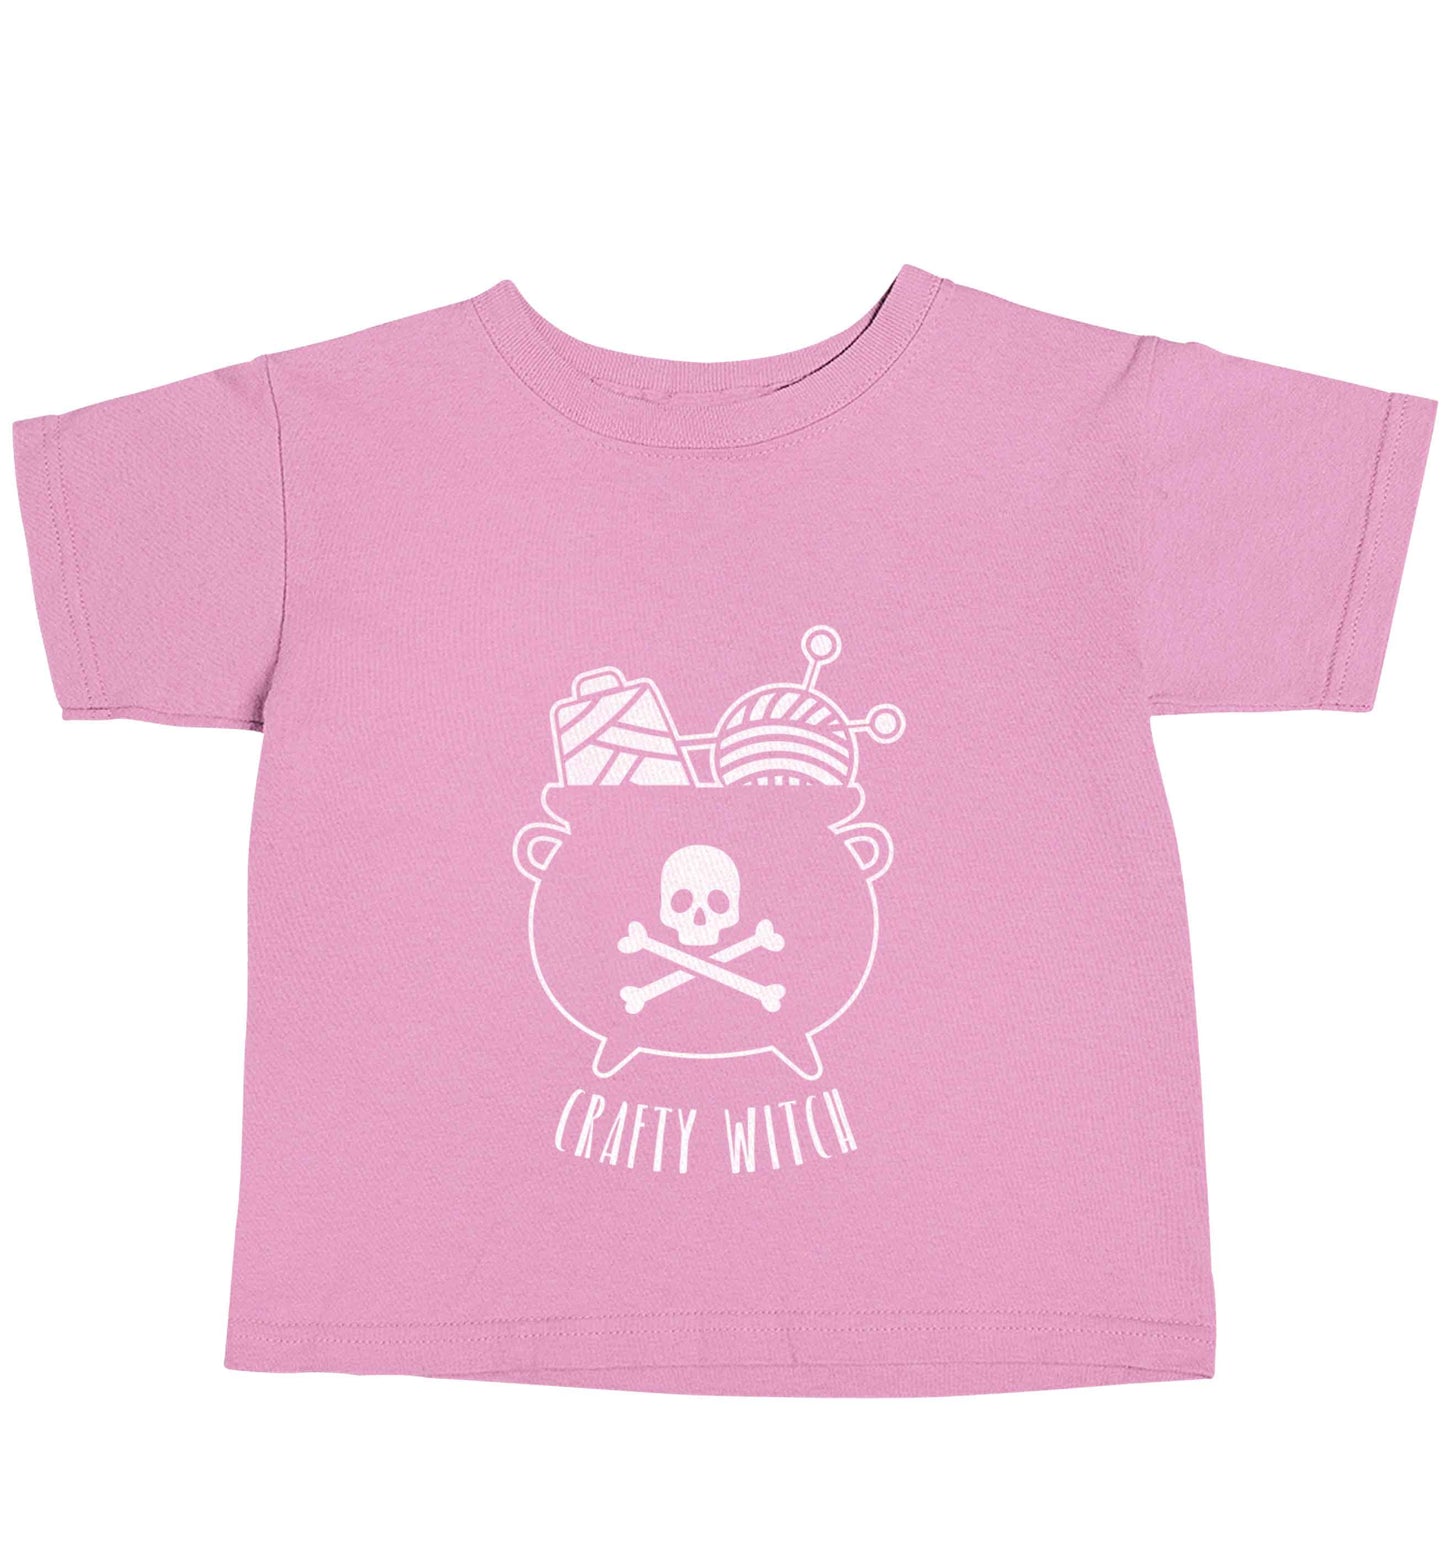 Crafty witch light pink baby toddler Tshirt 2 Years